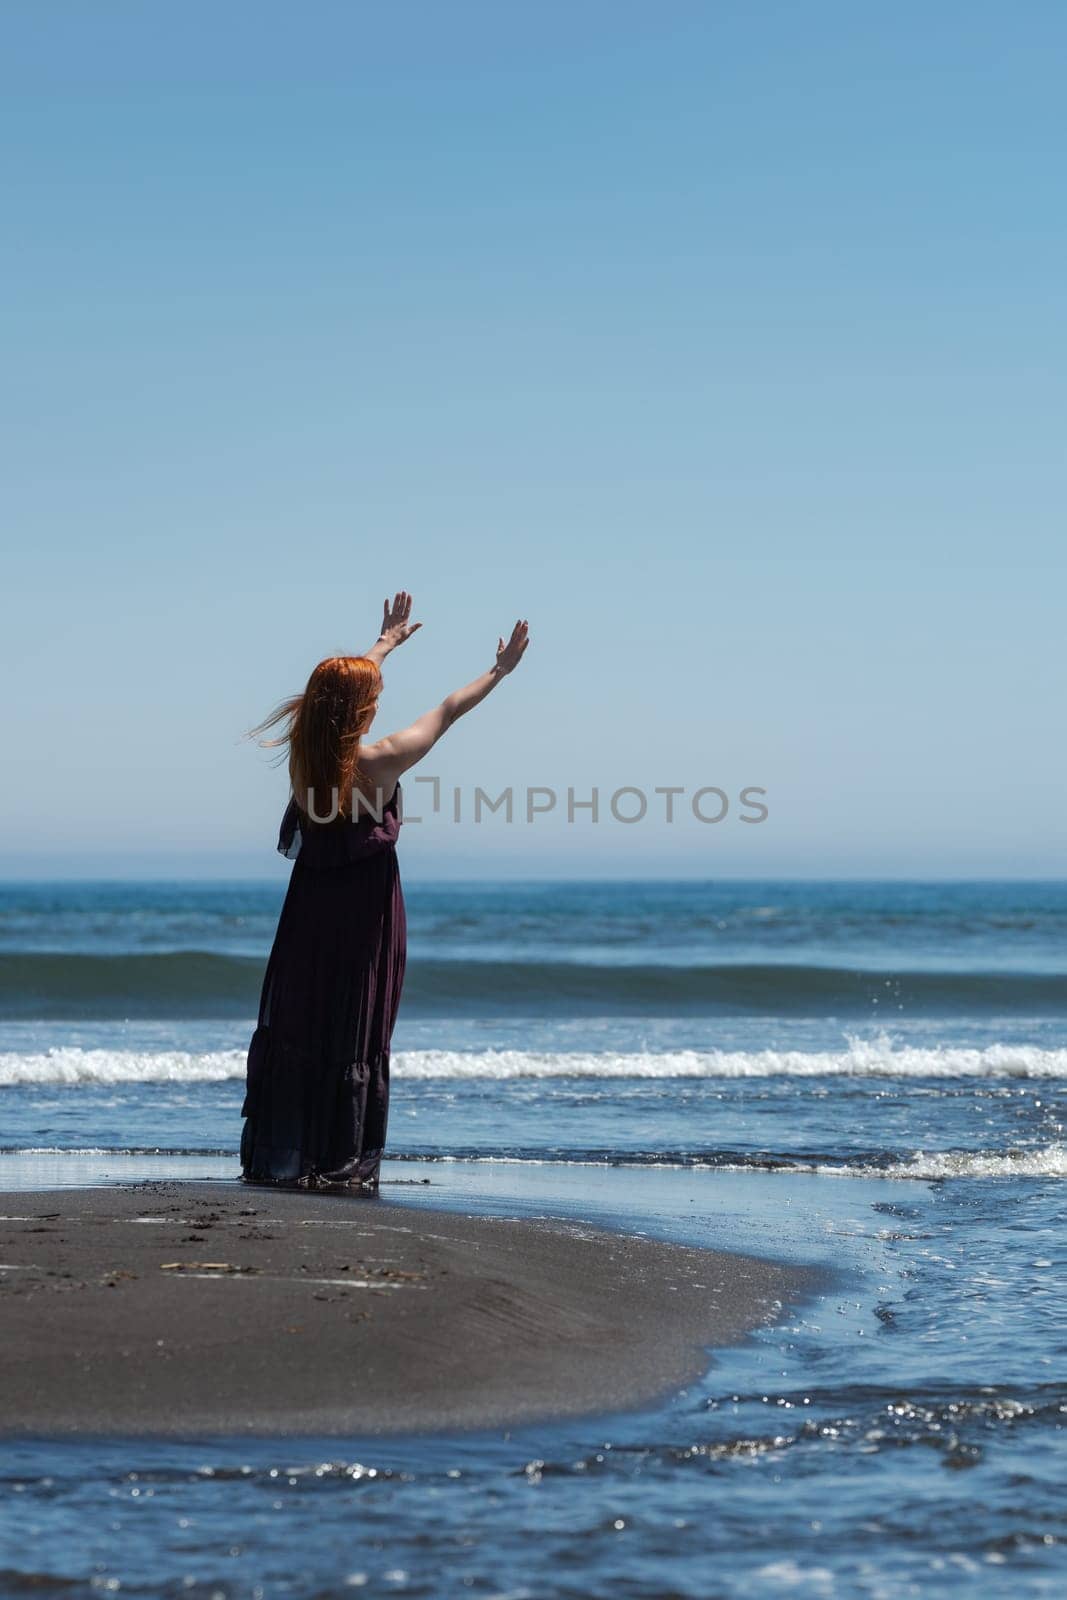 Woman in purple dress looks so happy and carefree as stands on sandy beach with arms raised high towards gorgeous blue sky and sea waves. She's even barefoot, which adds to feeling of freedom and joy